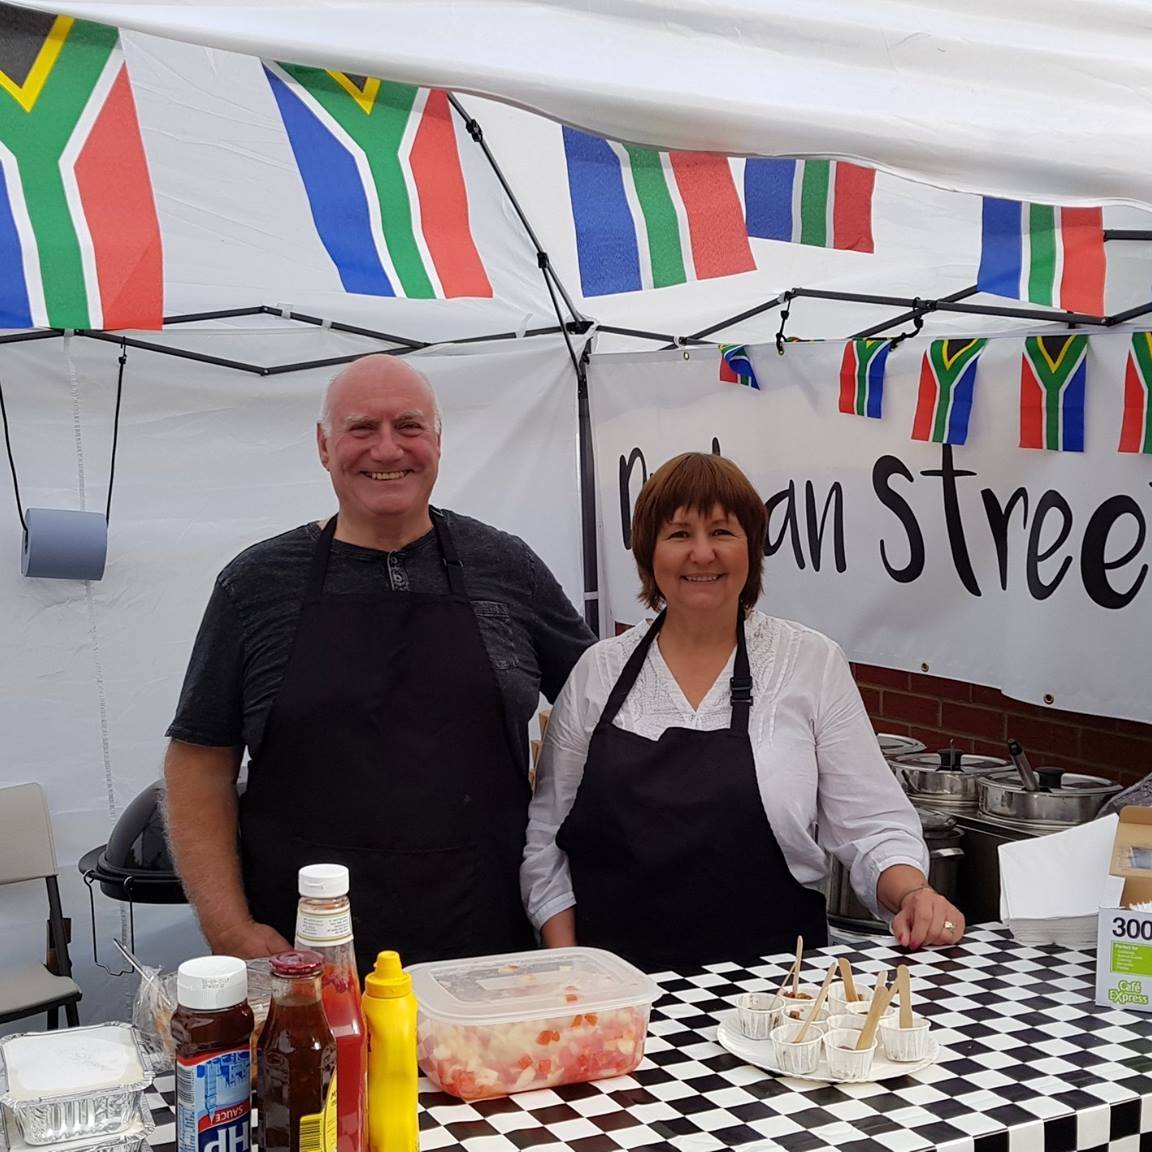 Durban Street Food owners Dave and Charmaine Mace